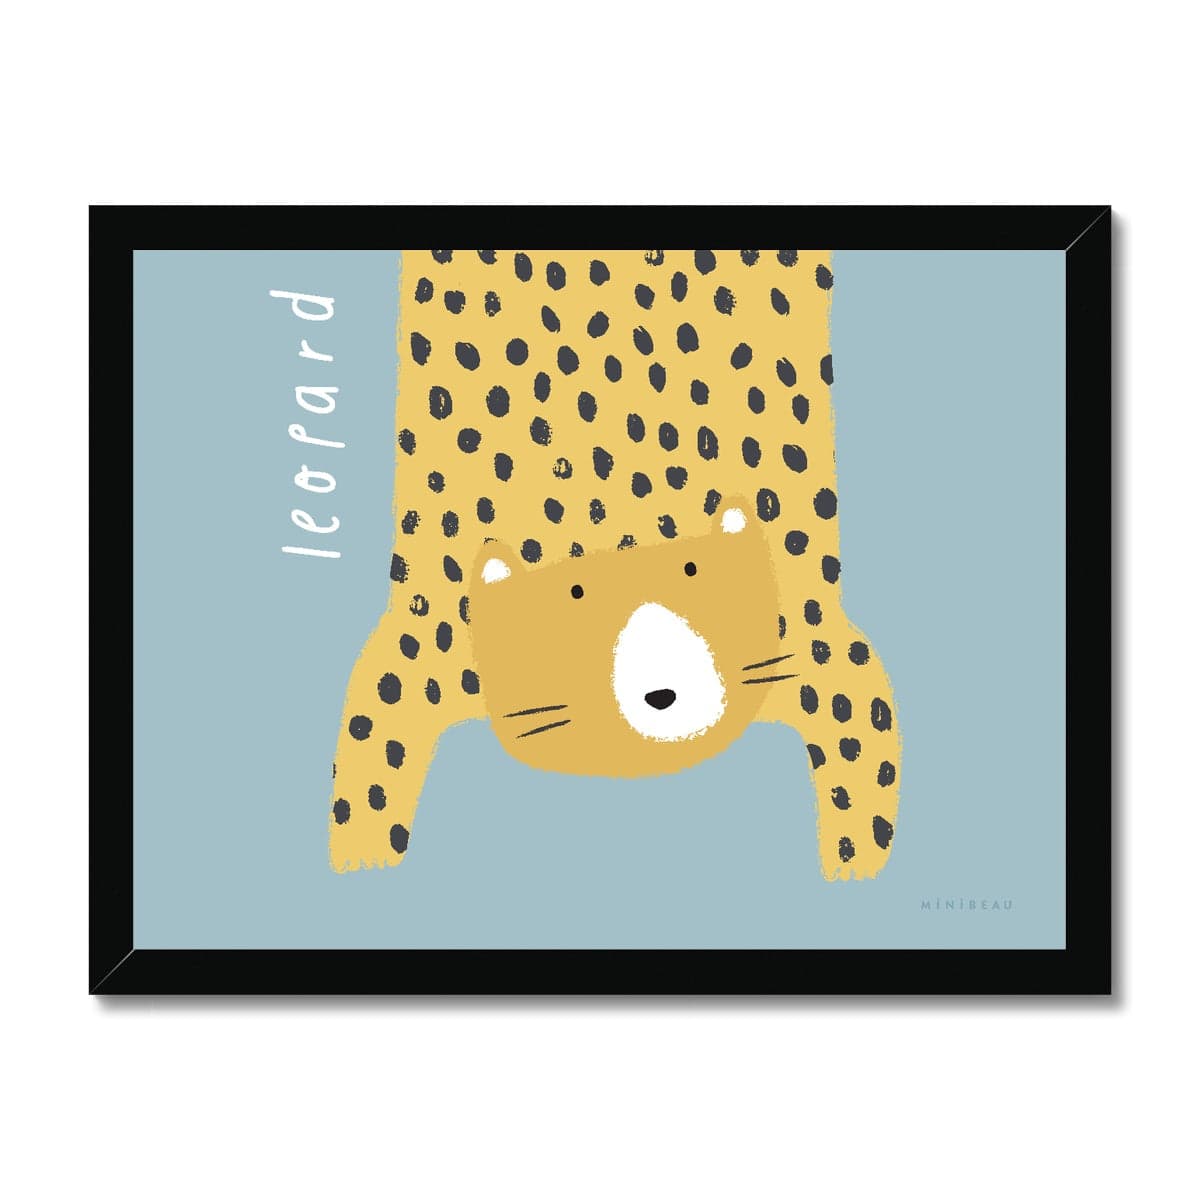 Our Leopard art print shows a hand-drawn leopard hanging down in to the picture, lifting it's head to look out at us on a light blue background, with the word leopard written alongside it, in a black wooden frame.